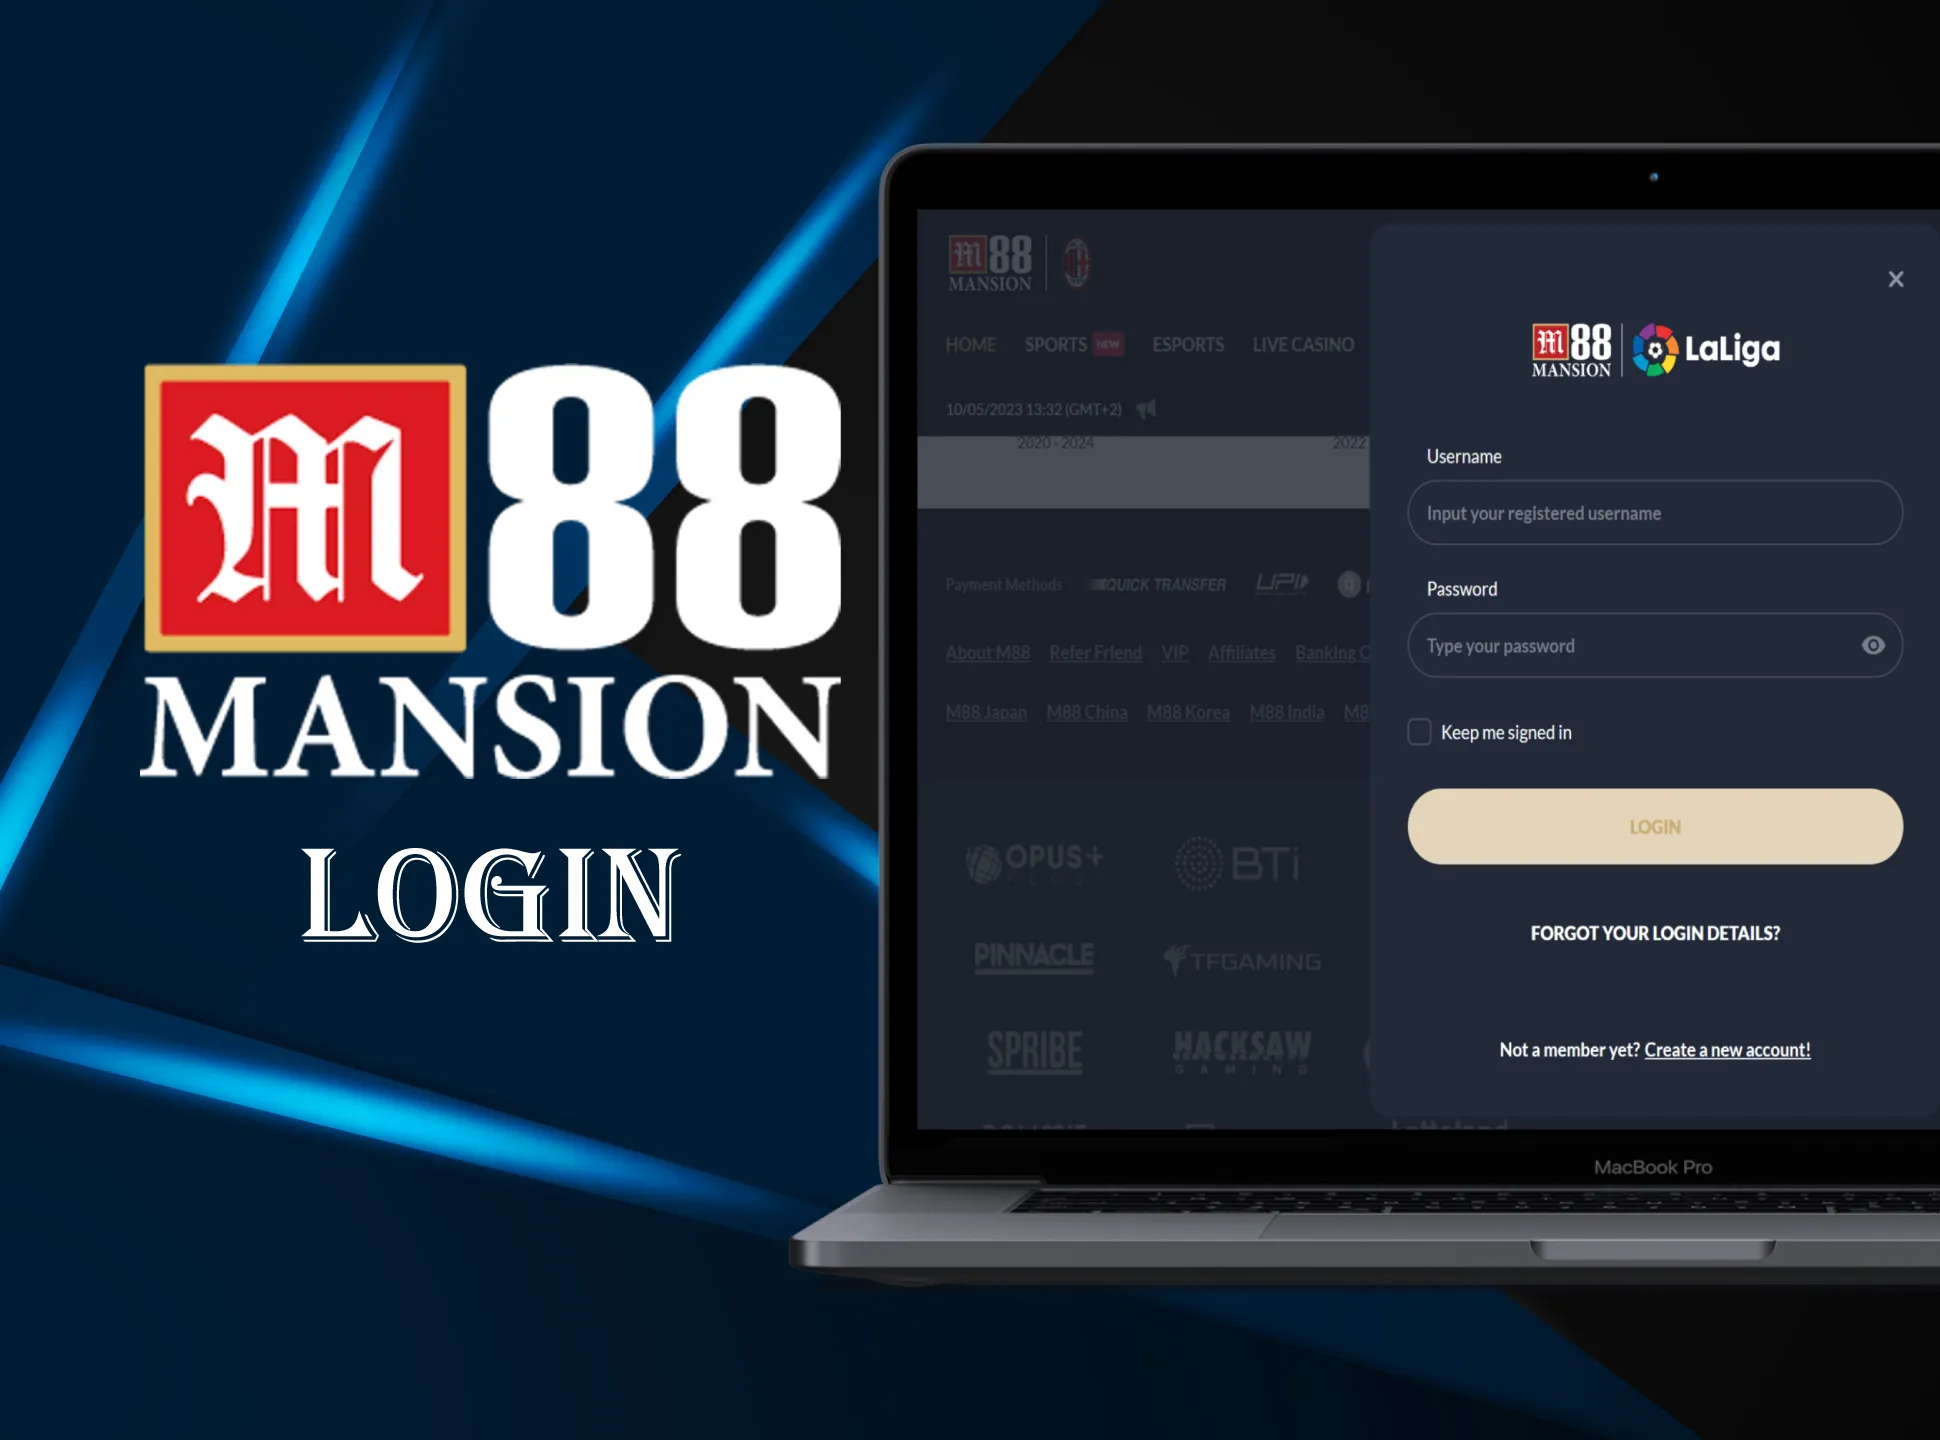 Use your M88 account for signing in.